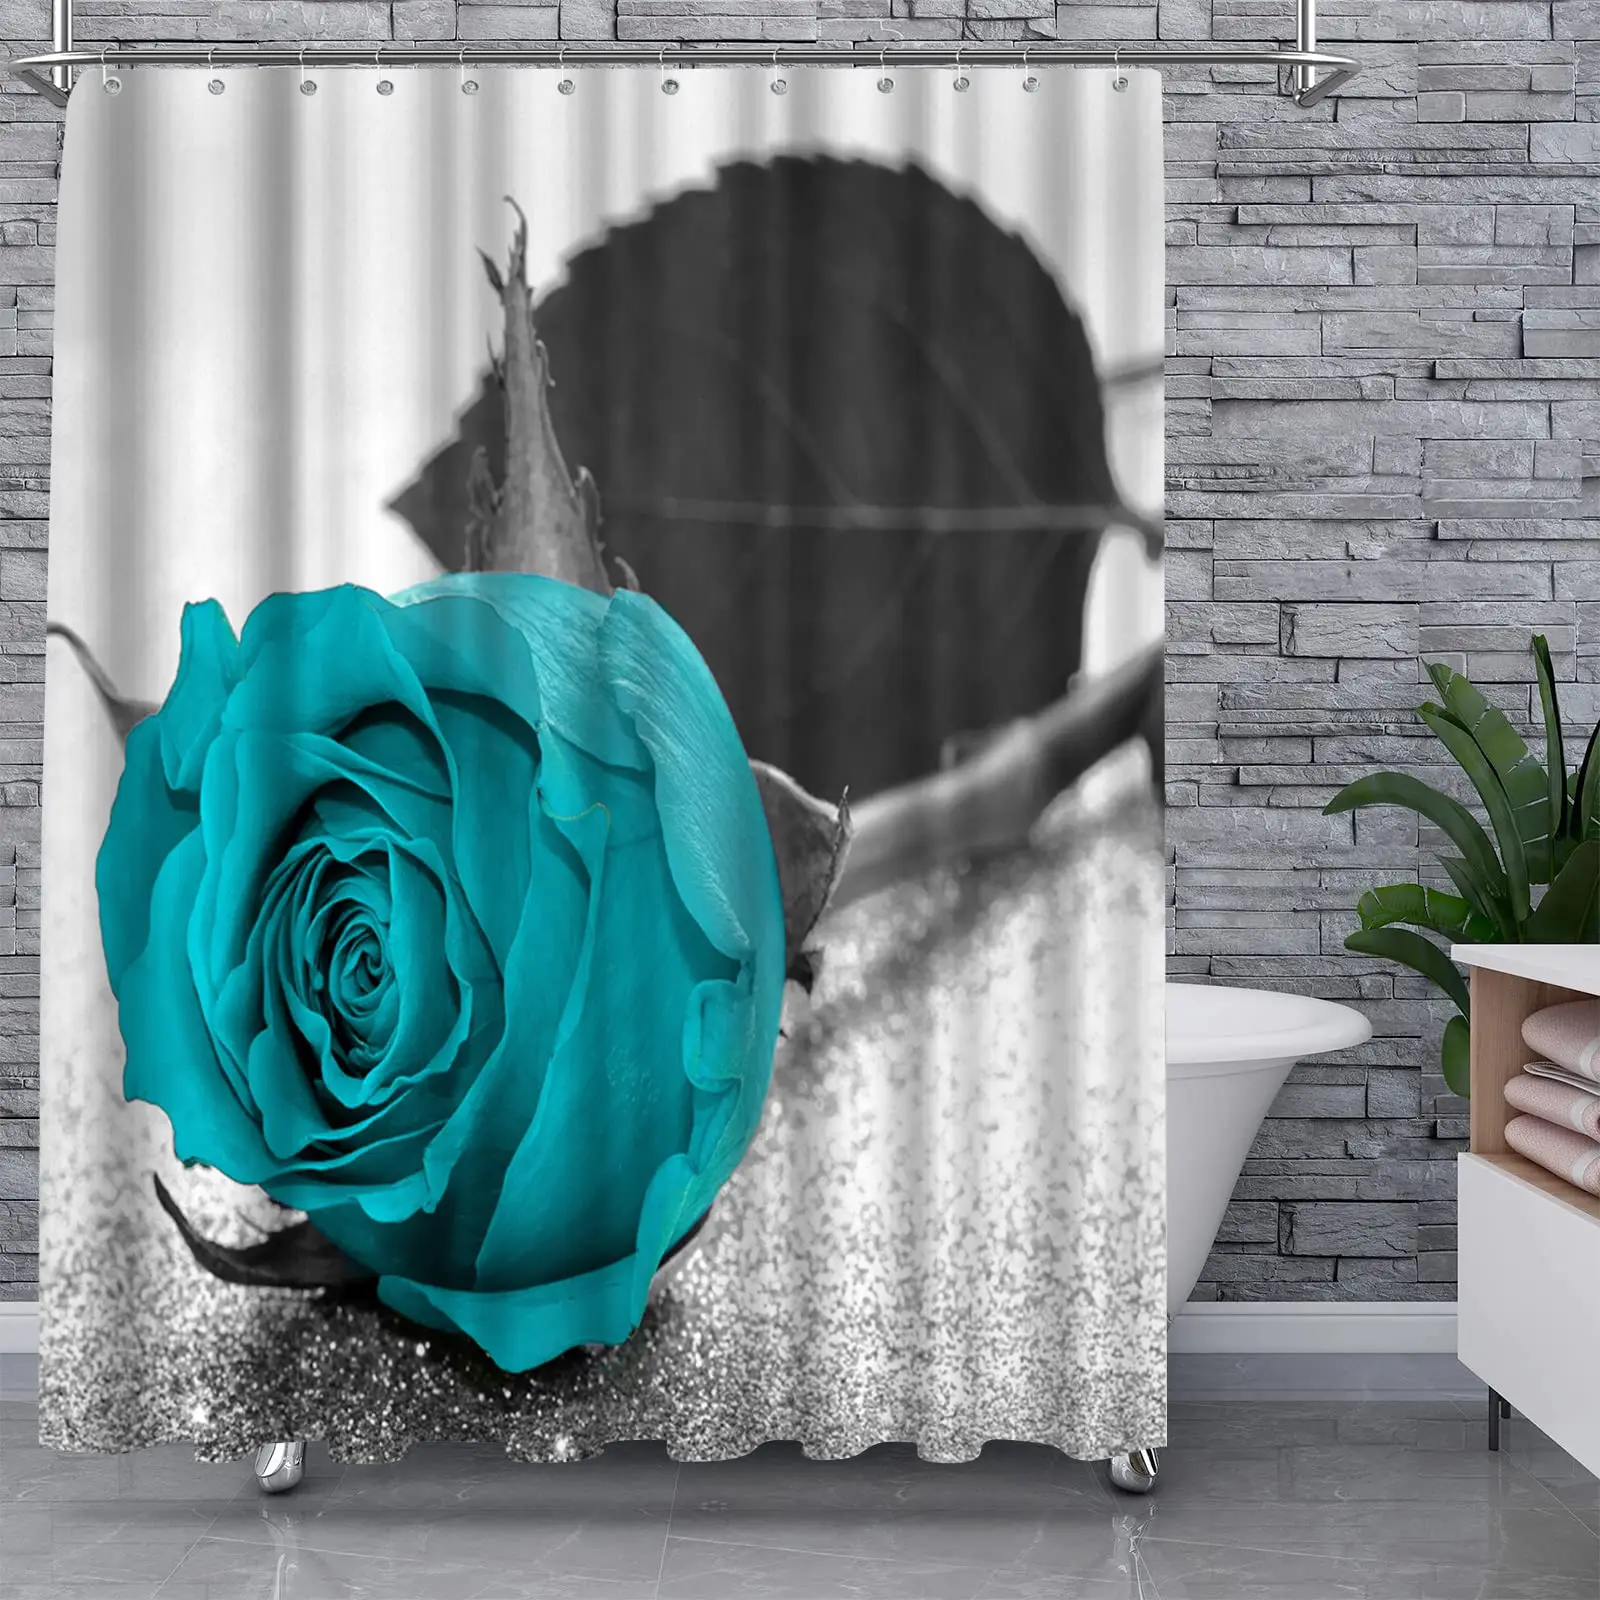 

Turquoise Shower Curtain Flower Floral Teal with Roses Watercolor Colorful Abstract Black Home Decor Hooks Set Waterproof Blue